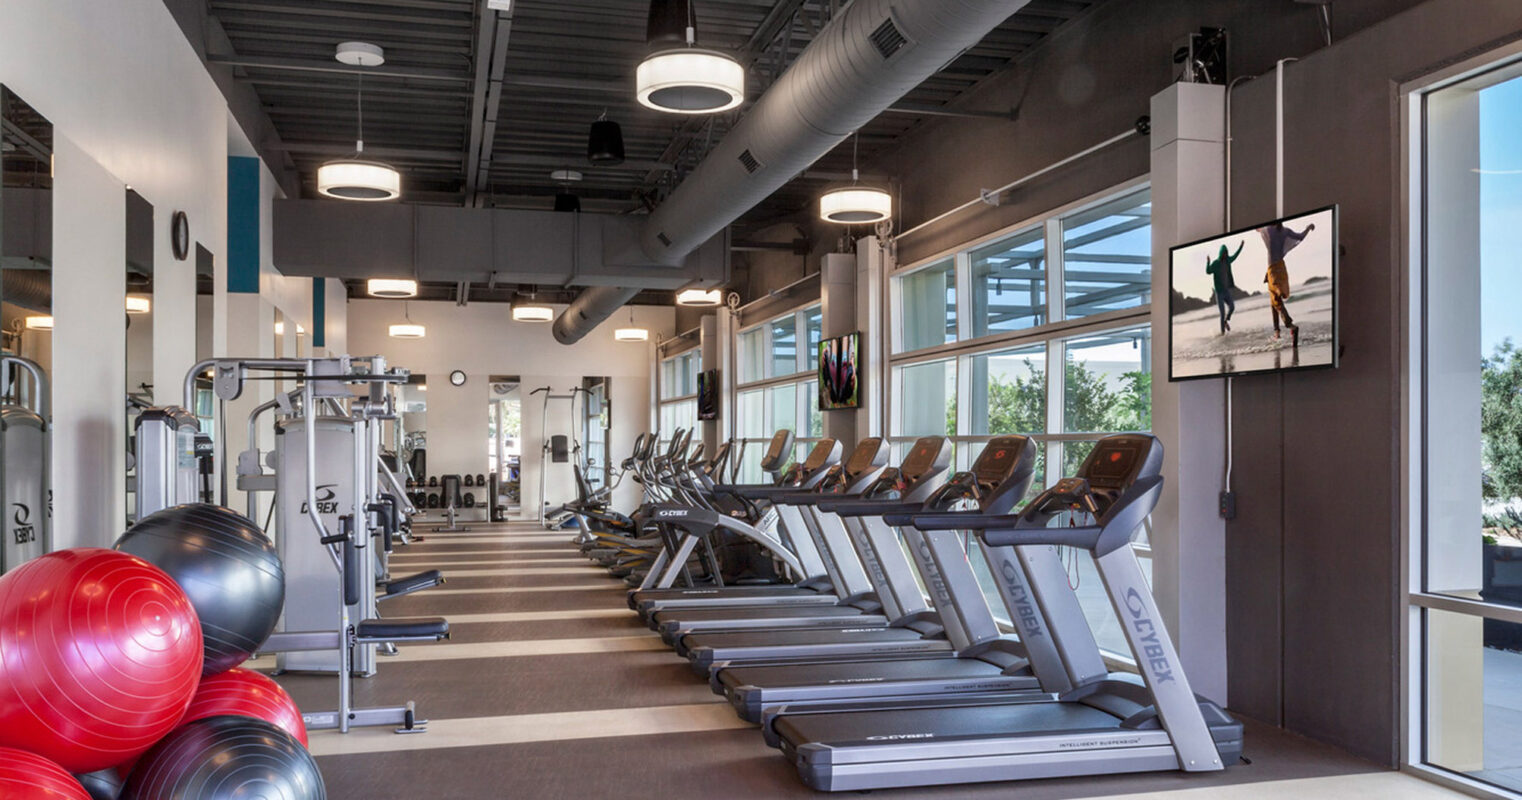 Modern gym interior featuring a row of treadmills facing floor-to-ceiling windows, mirrored walls, a variety of resistance training machines, and a balance ball station. Industrial-inspired exposed ductwork complements the sleek, neutral color palette.